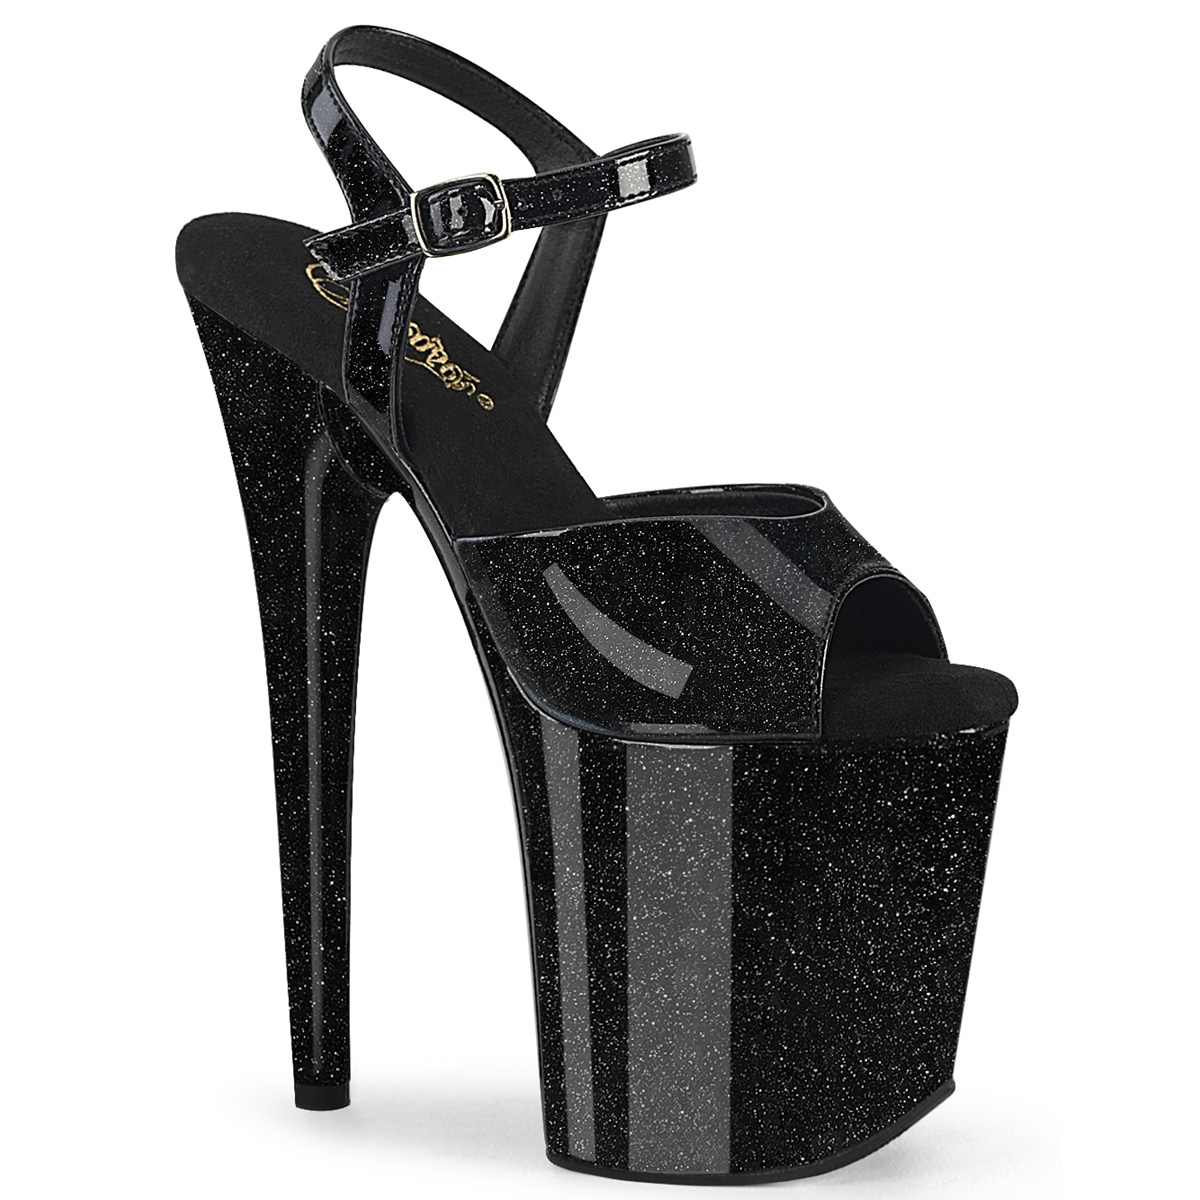 Black and Silver Glitter Chunky Heels Ankle Strap Platform Pumps | Platform  pumps heels, Heels, Shoes heels classy